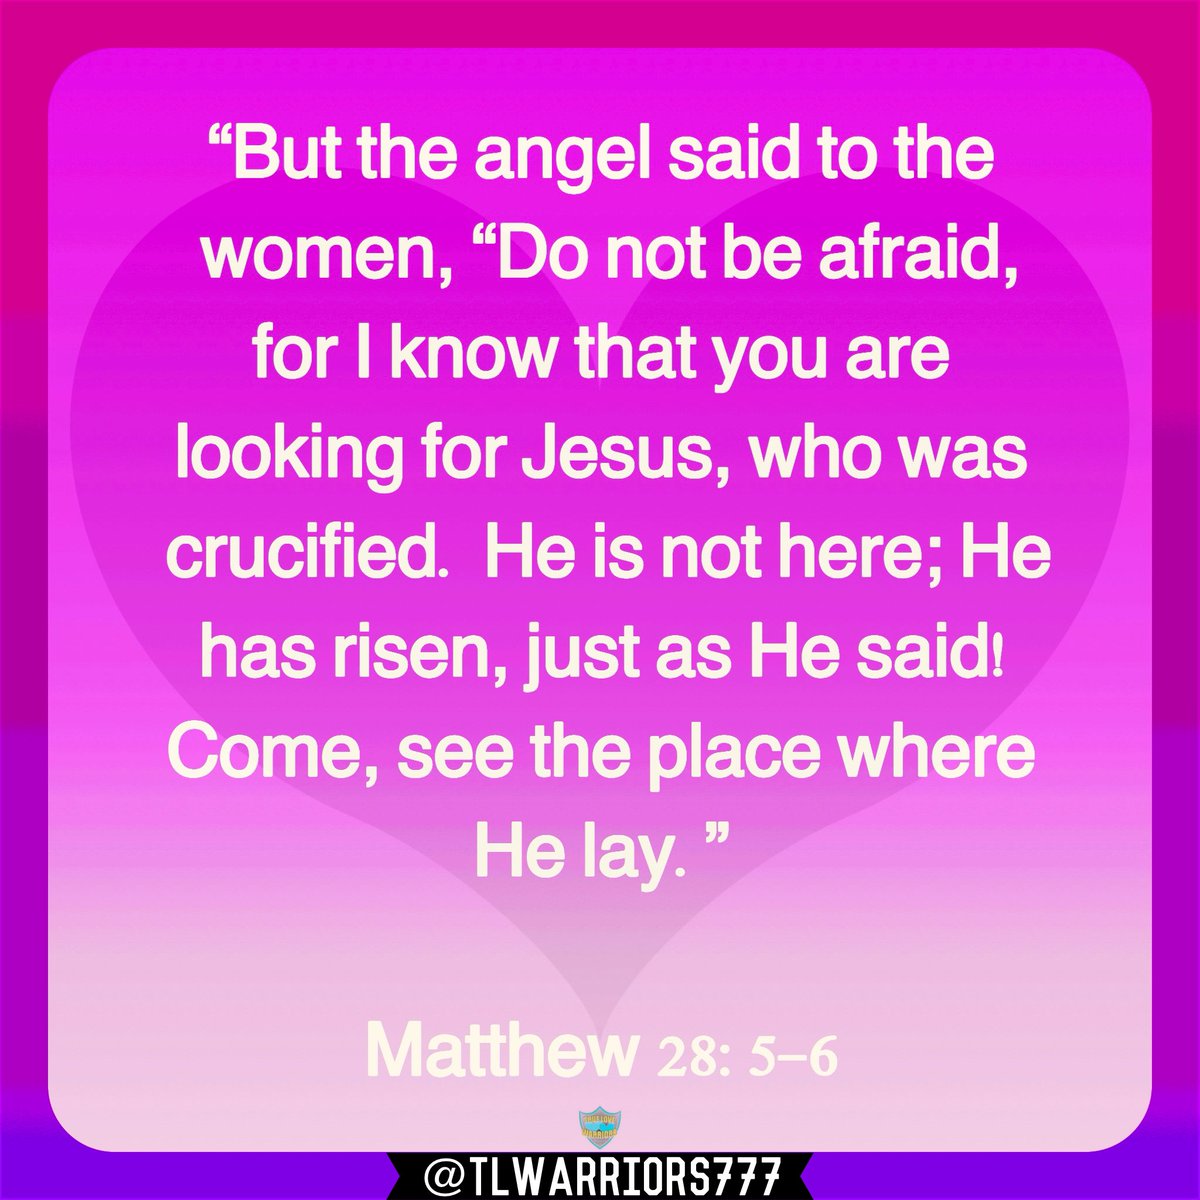 “But the angel said to the women, “Do not be afraid, for I know that you are looking for Jesus, who was crucified. He is not here; He has risen, just as He said! Come, see the place where He lay.” Matthew 28:5-6